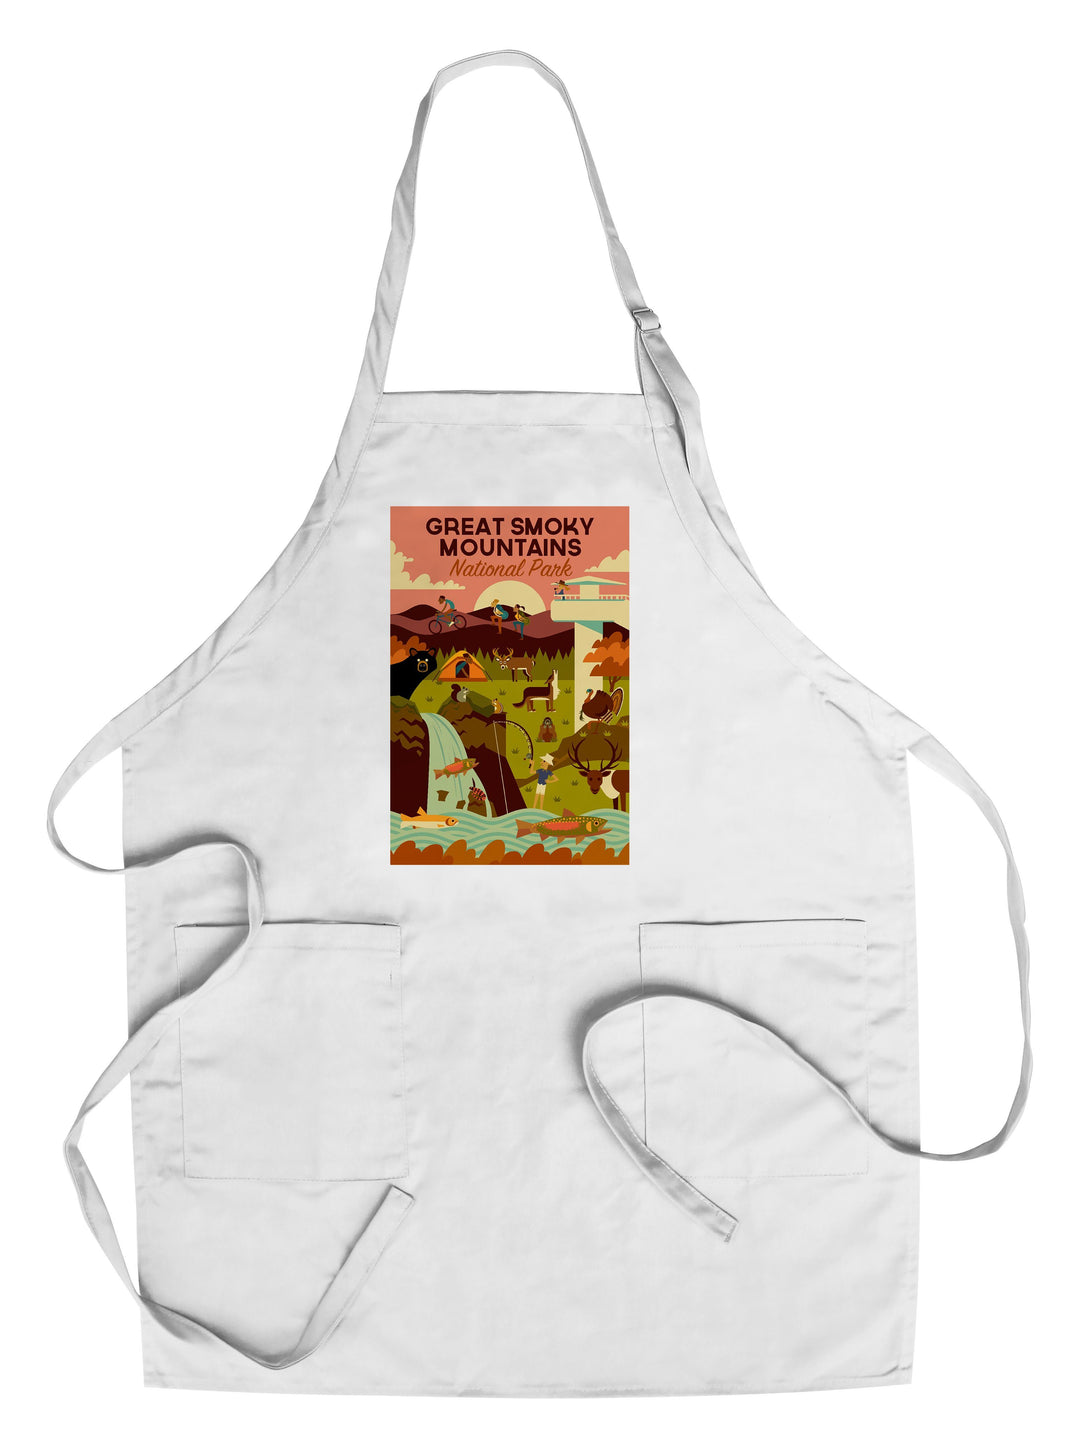 Great Smoky Mountains National Park, Tennessee, Geometric National Park Series, Lantern Press Artwork, Towels and Aprons Kitchen Lantern Press Chef's Apron 